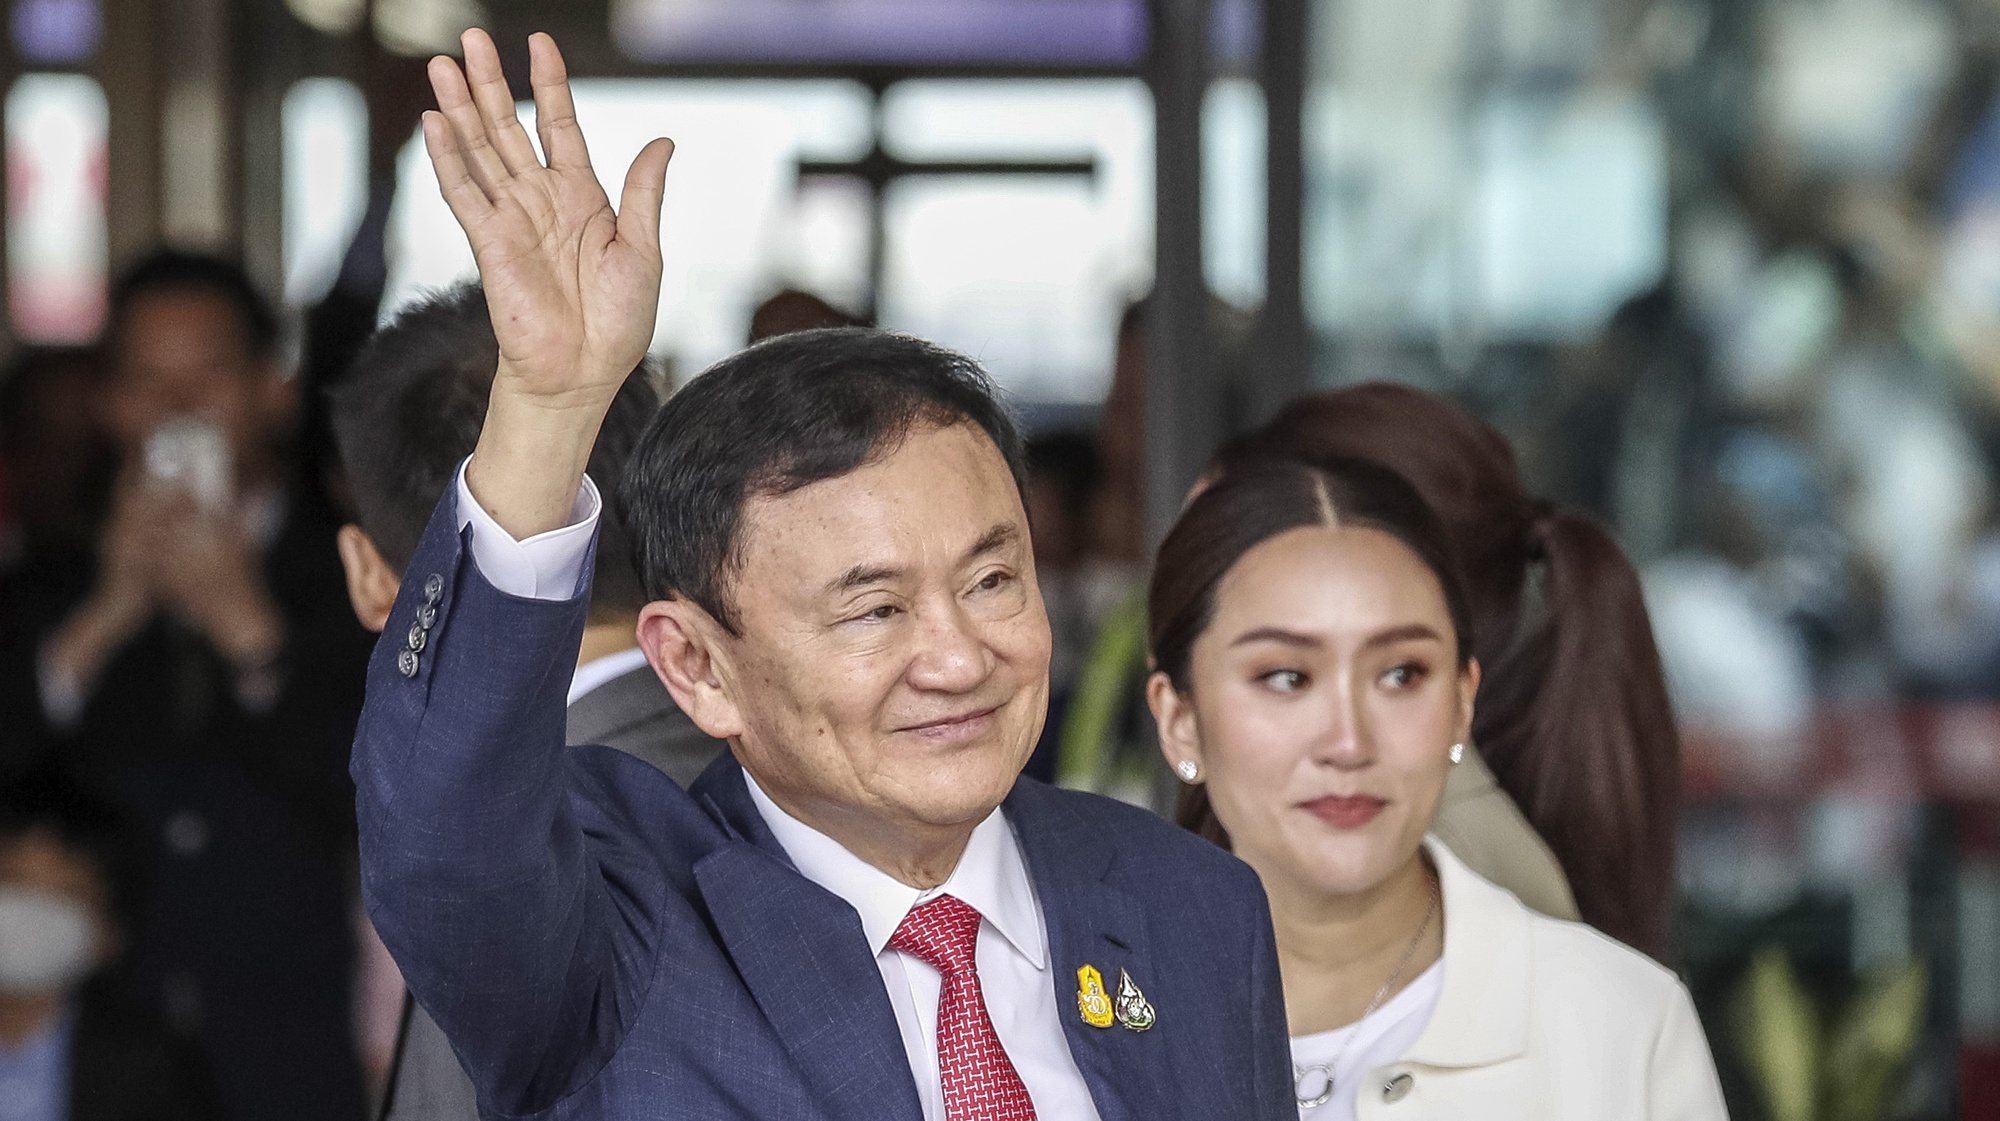 epa11000666 Former Thai prime minister Thaksin Shinawatra, accompanied by his daughter and Pheu Thai Party prime ministerial candidate Paetongtarn Shinawatra, greets supporters and journalists upon his arrival at Don Mueang airport in Bangkok, Thailand, 22 August 2023. Shinawatra returned to Thailand after living in self-imposed exile for 15 years, following his overthrow by a military coup on 19 September 2006.  EPA/RUNGROJ YONGRIT